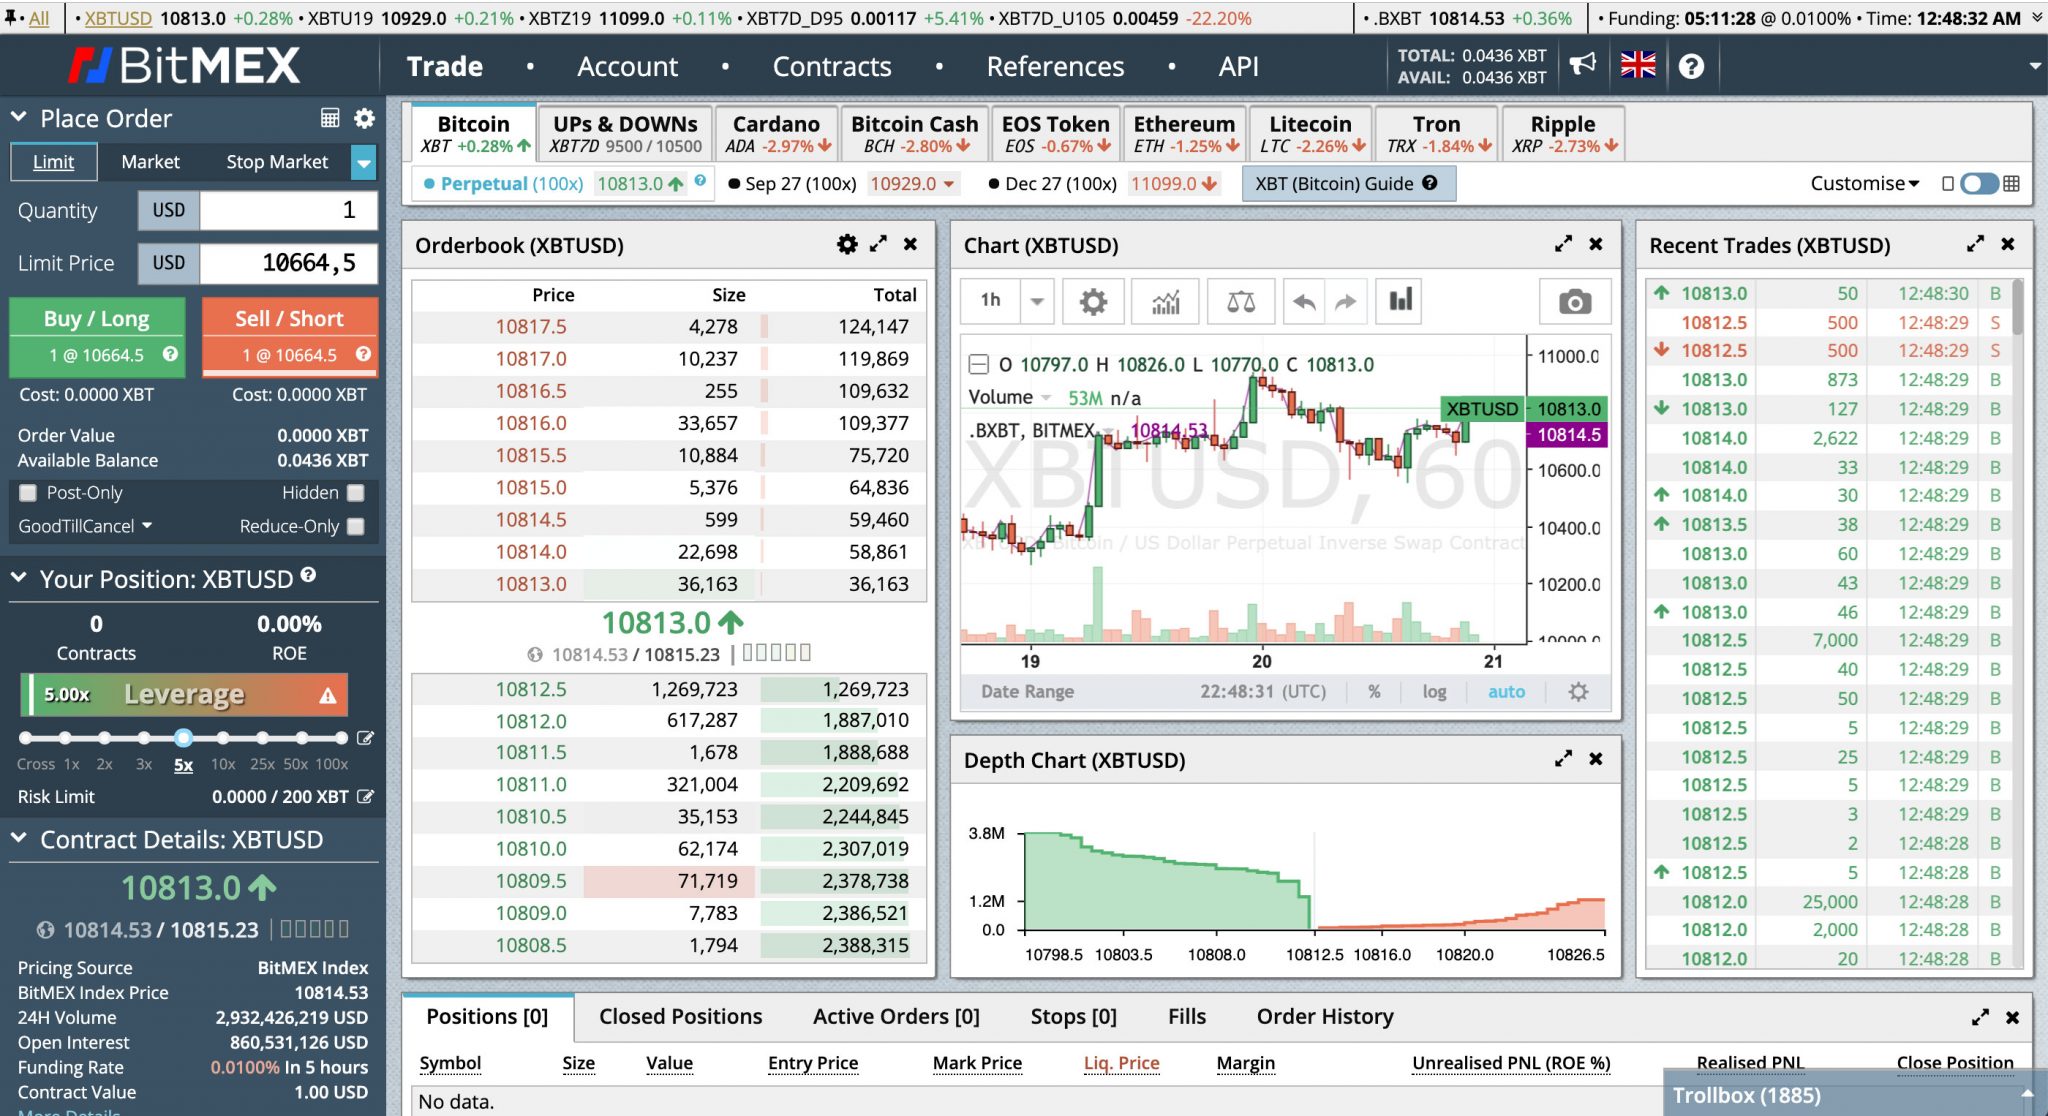 Interface for the crypto exchange Bitmex.